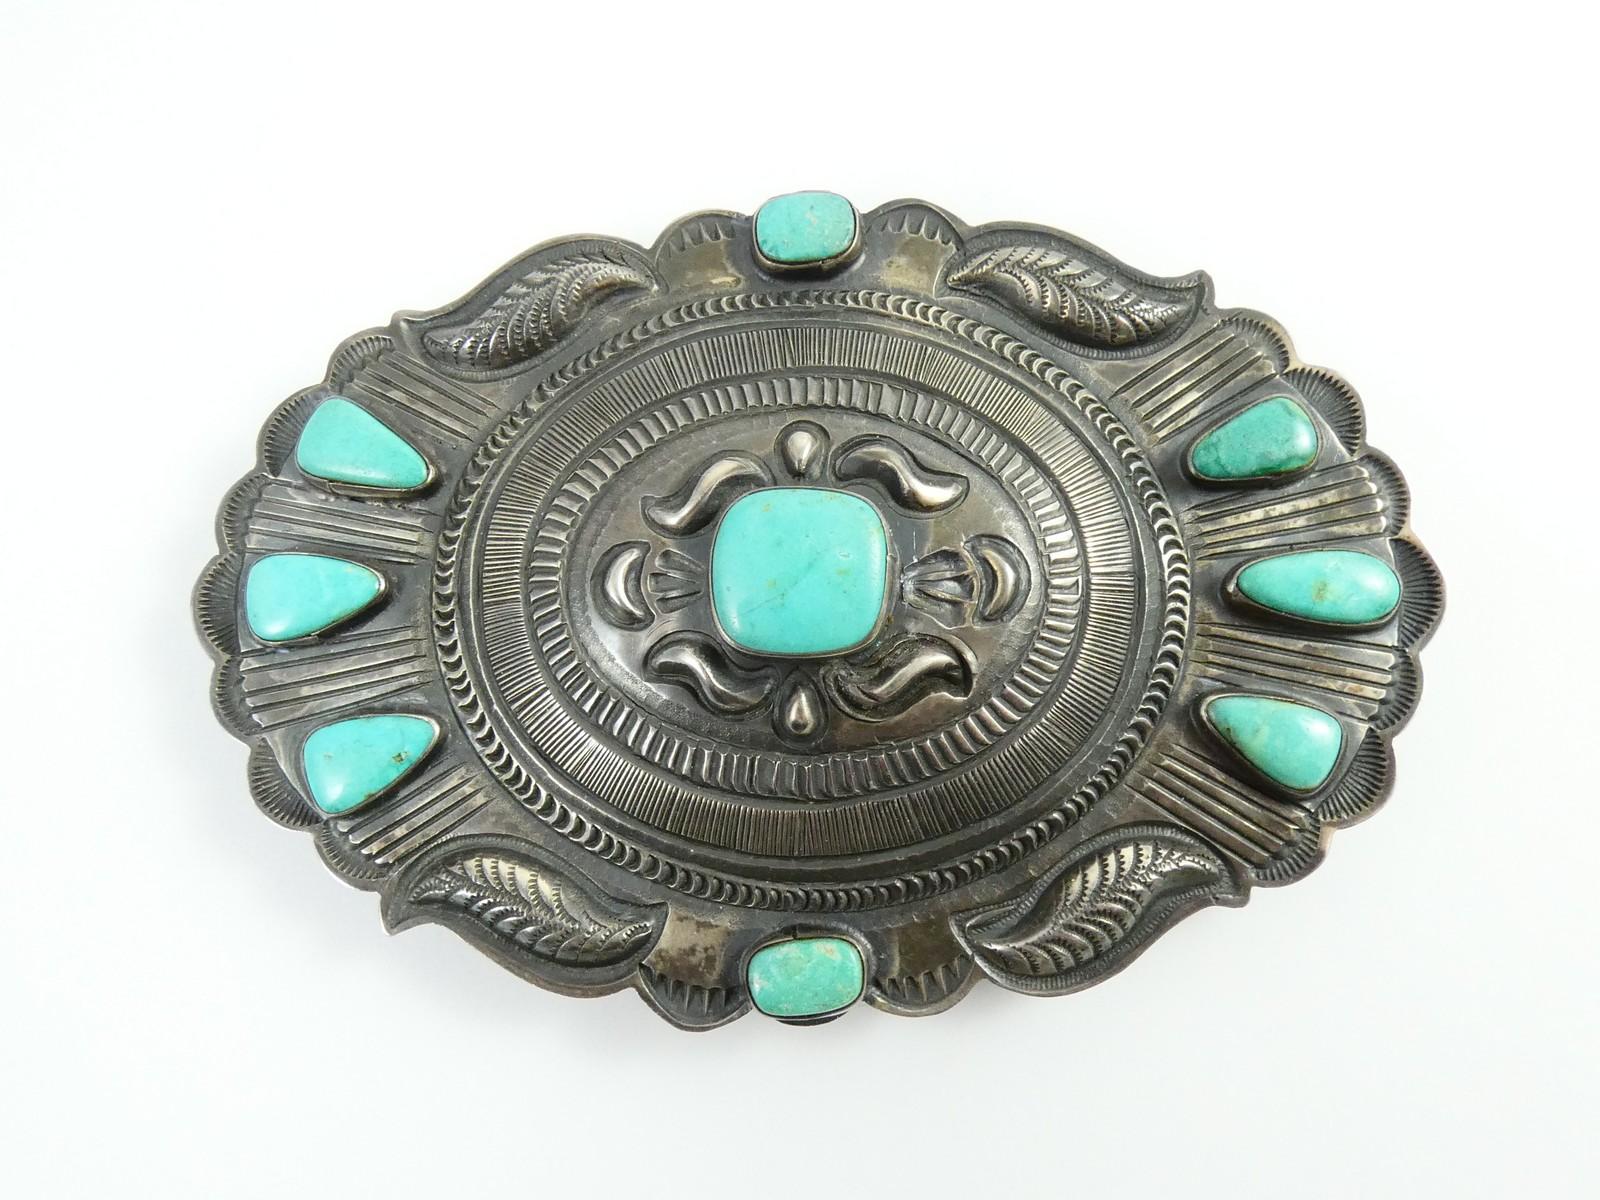 LARGE STERLING BUCKLE